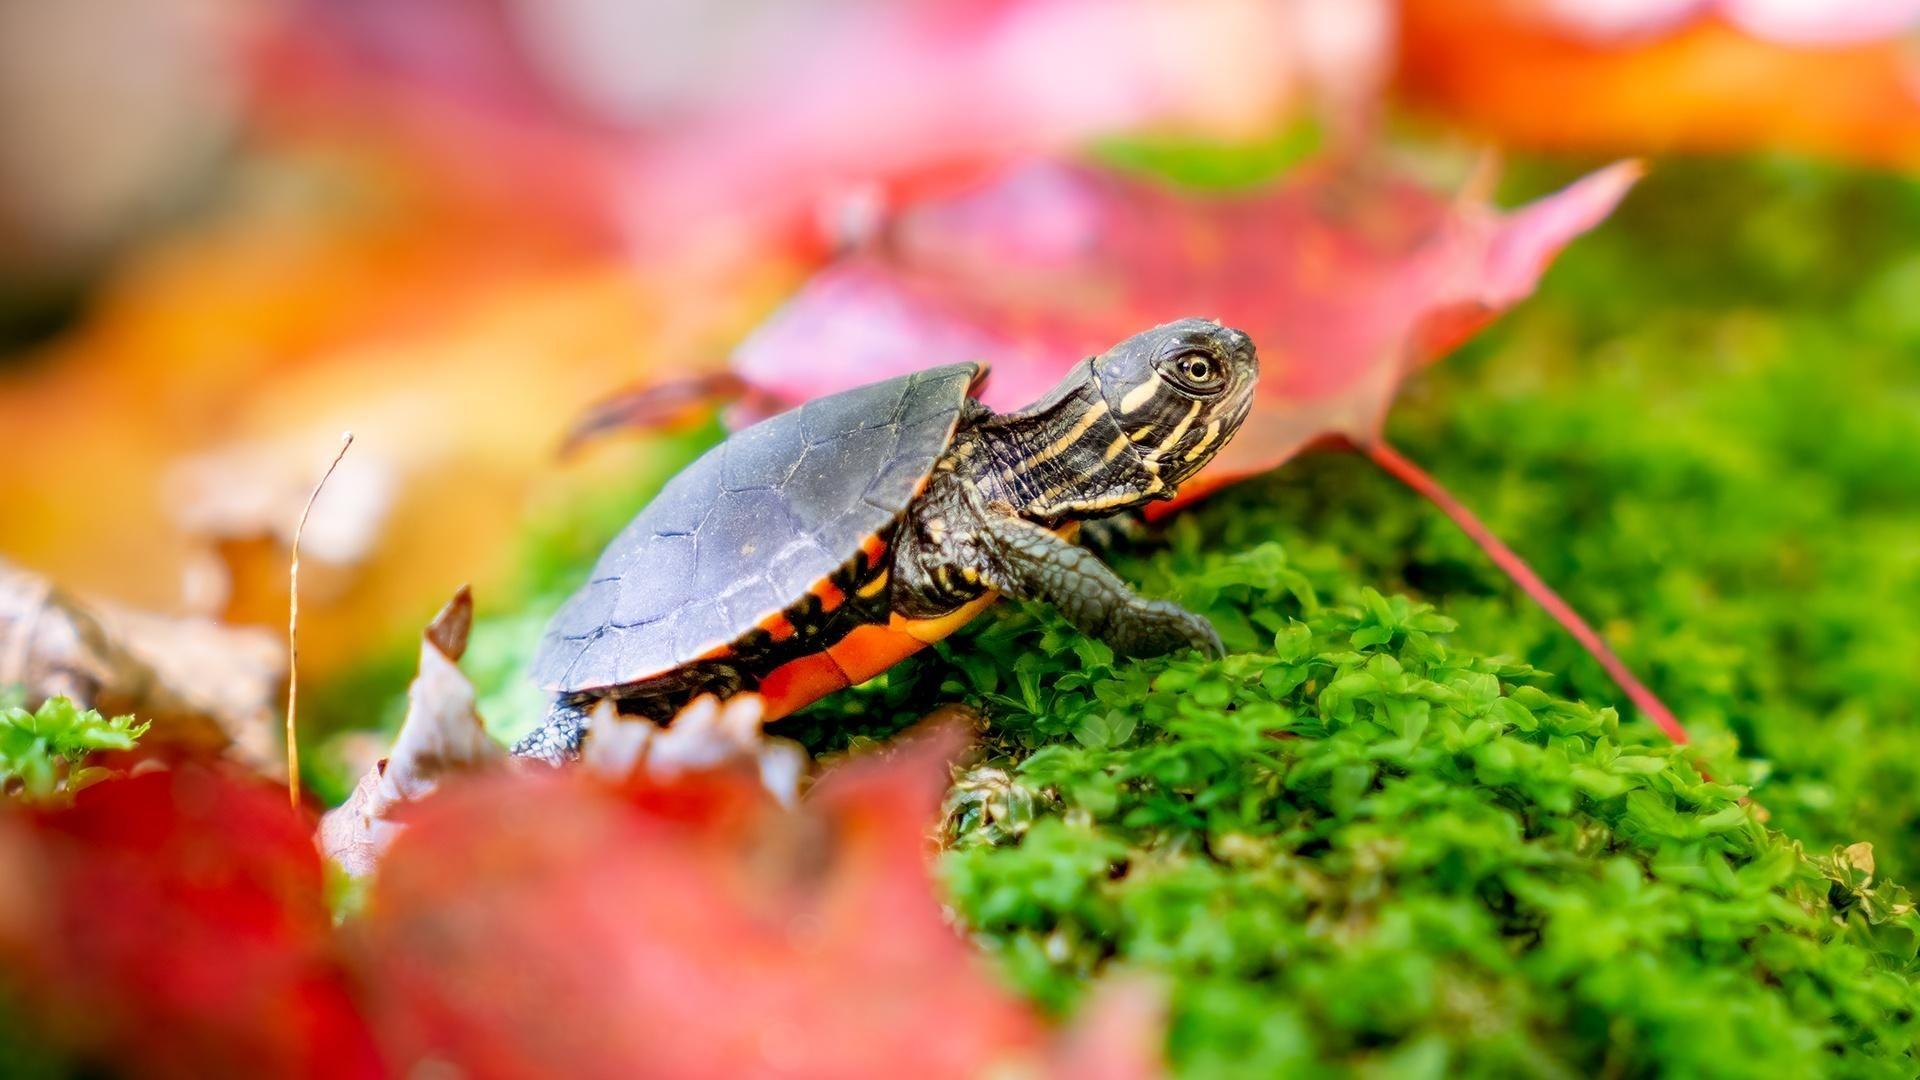 A small painted turtle on green moss with fallen red leaves around it.